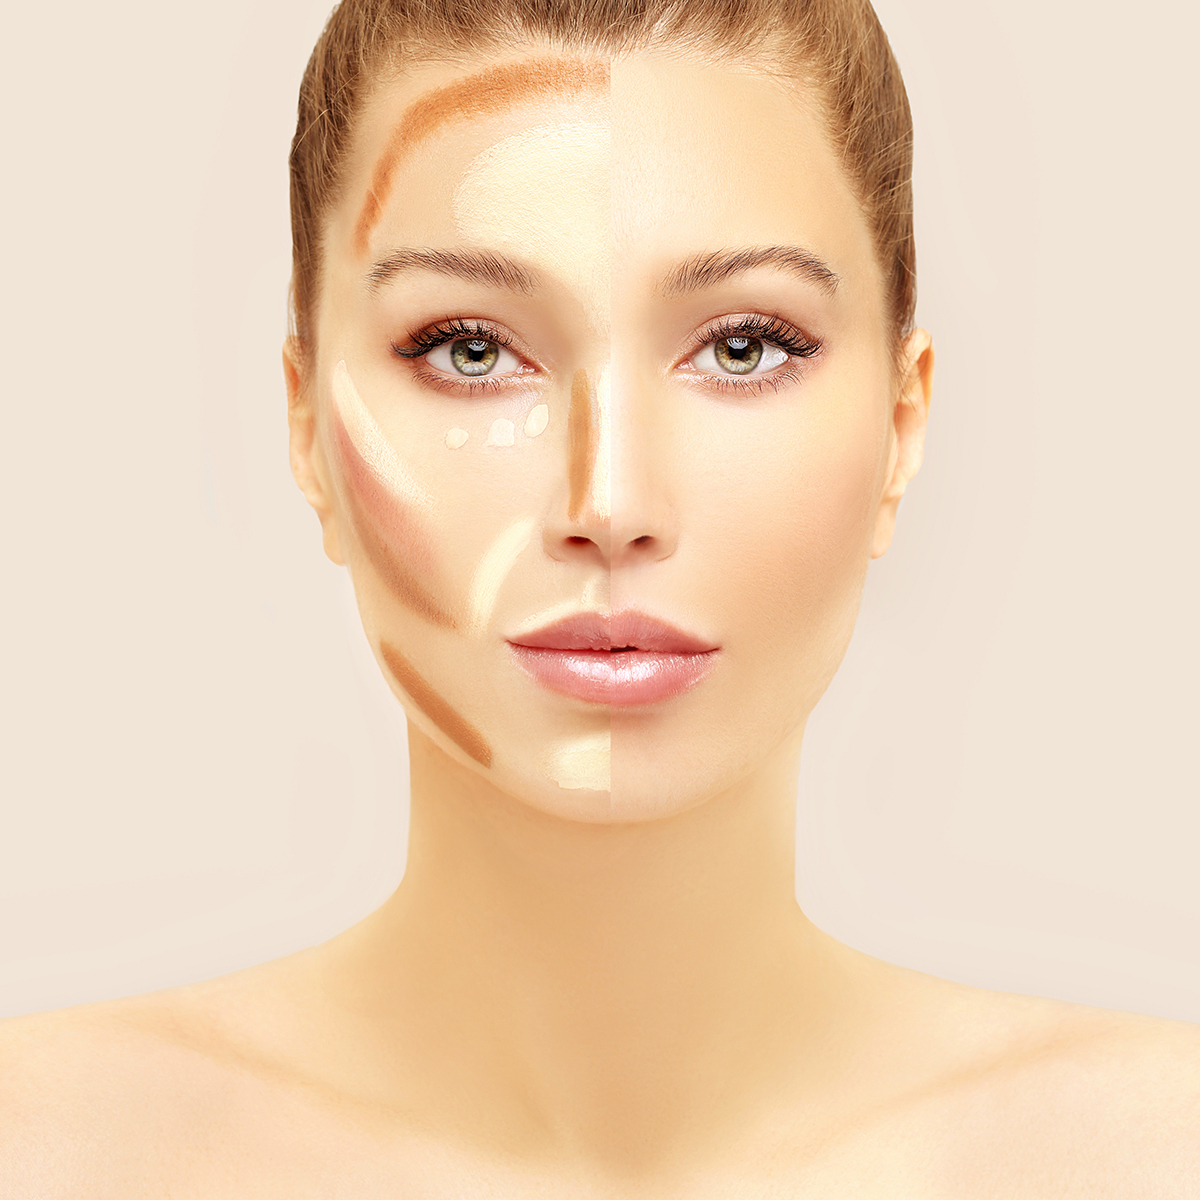 Less is more with everyday contour makeup! This is my method for face